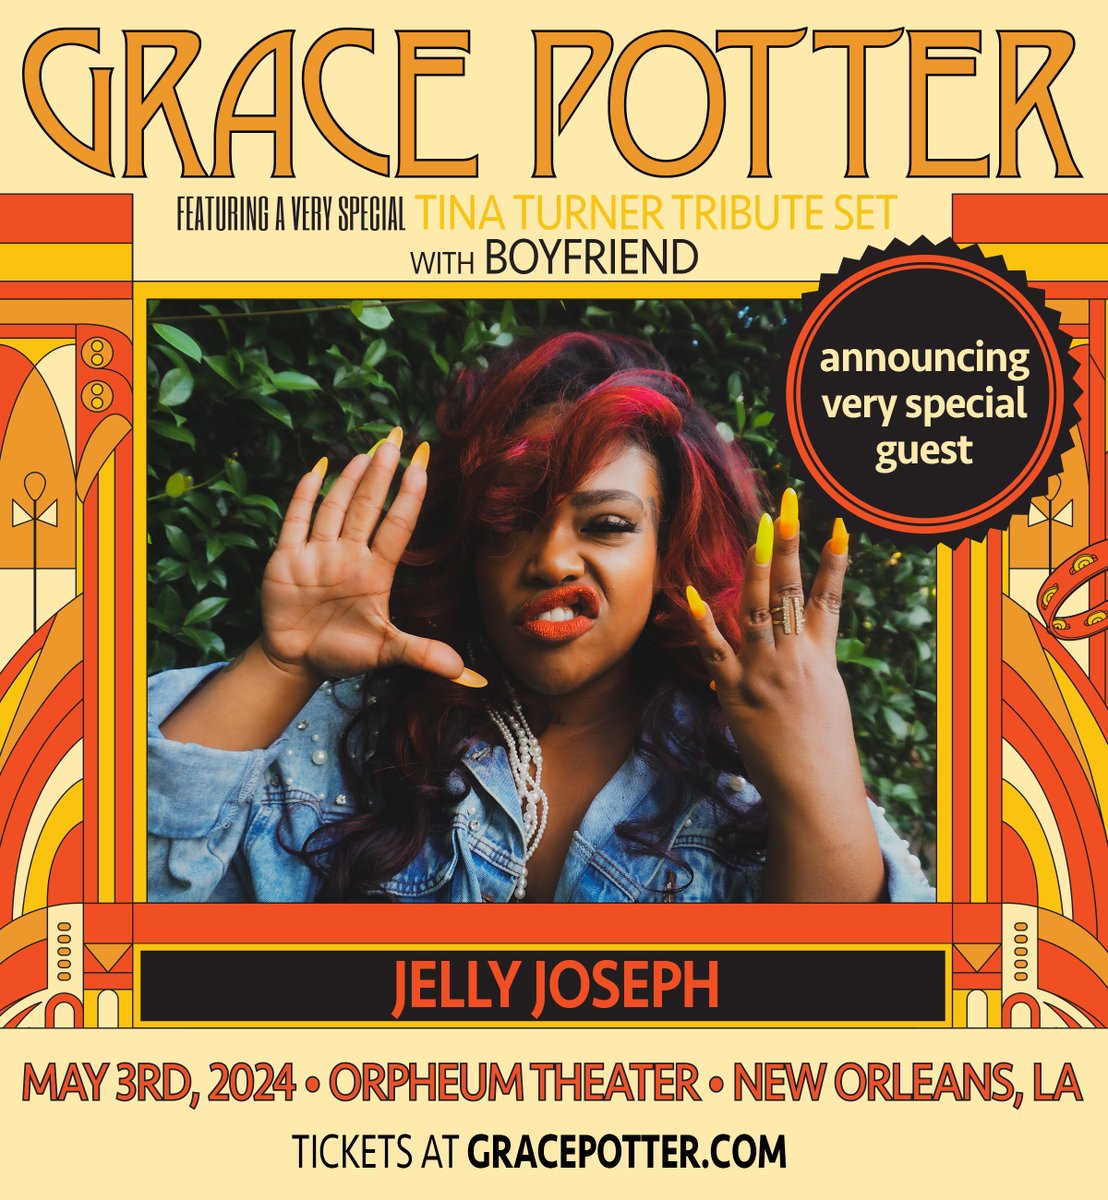 This show keeps getting hotter! Announcing another very special guest Jelly Joseph for my show tomorrow in NOLA! Who’s coming out to it? ticketmaster.com/event/1B00604E…